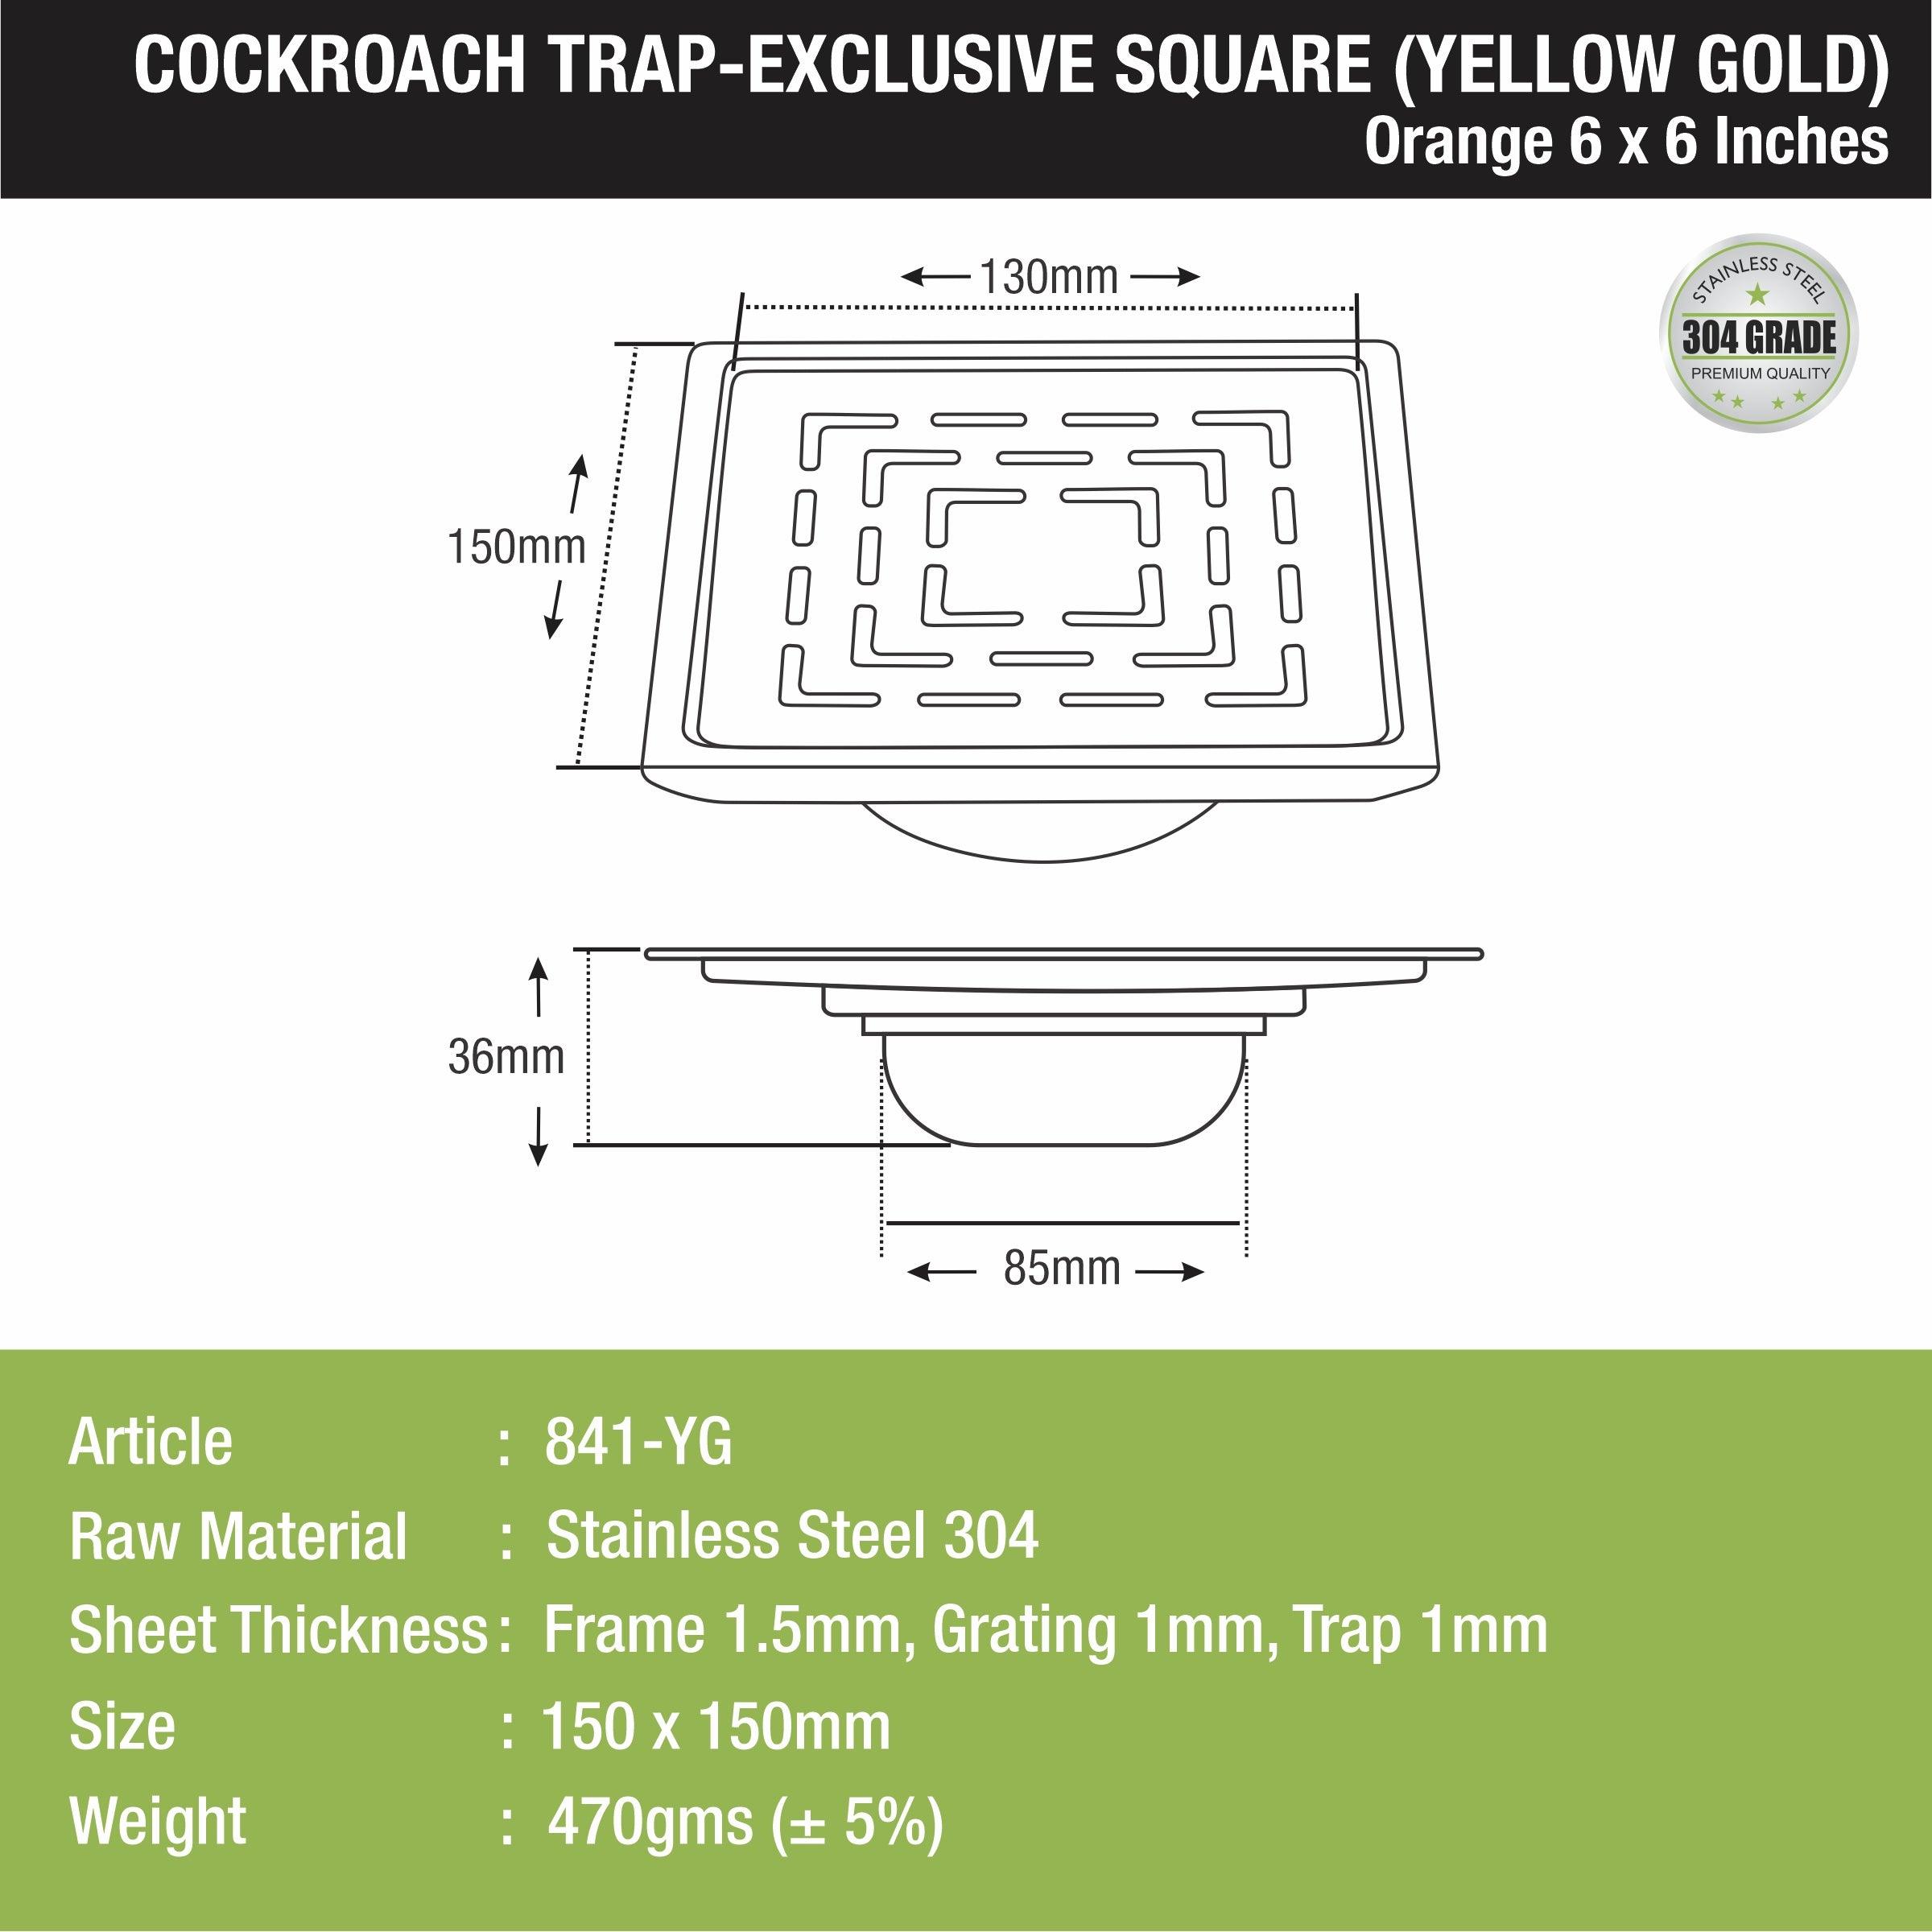 Orange Exclusive Square Floor Drain in Yellow Gold PVD Coating (6 x 6 Inches) with Cockroach Trap - LIPKA - Lipka Home